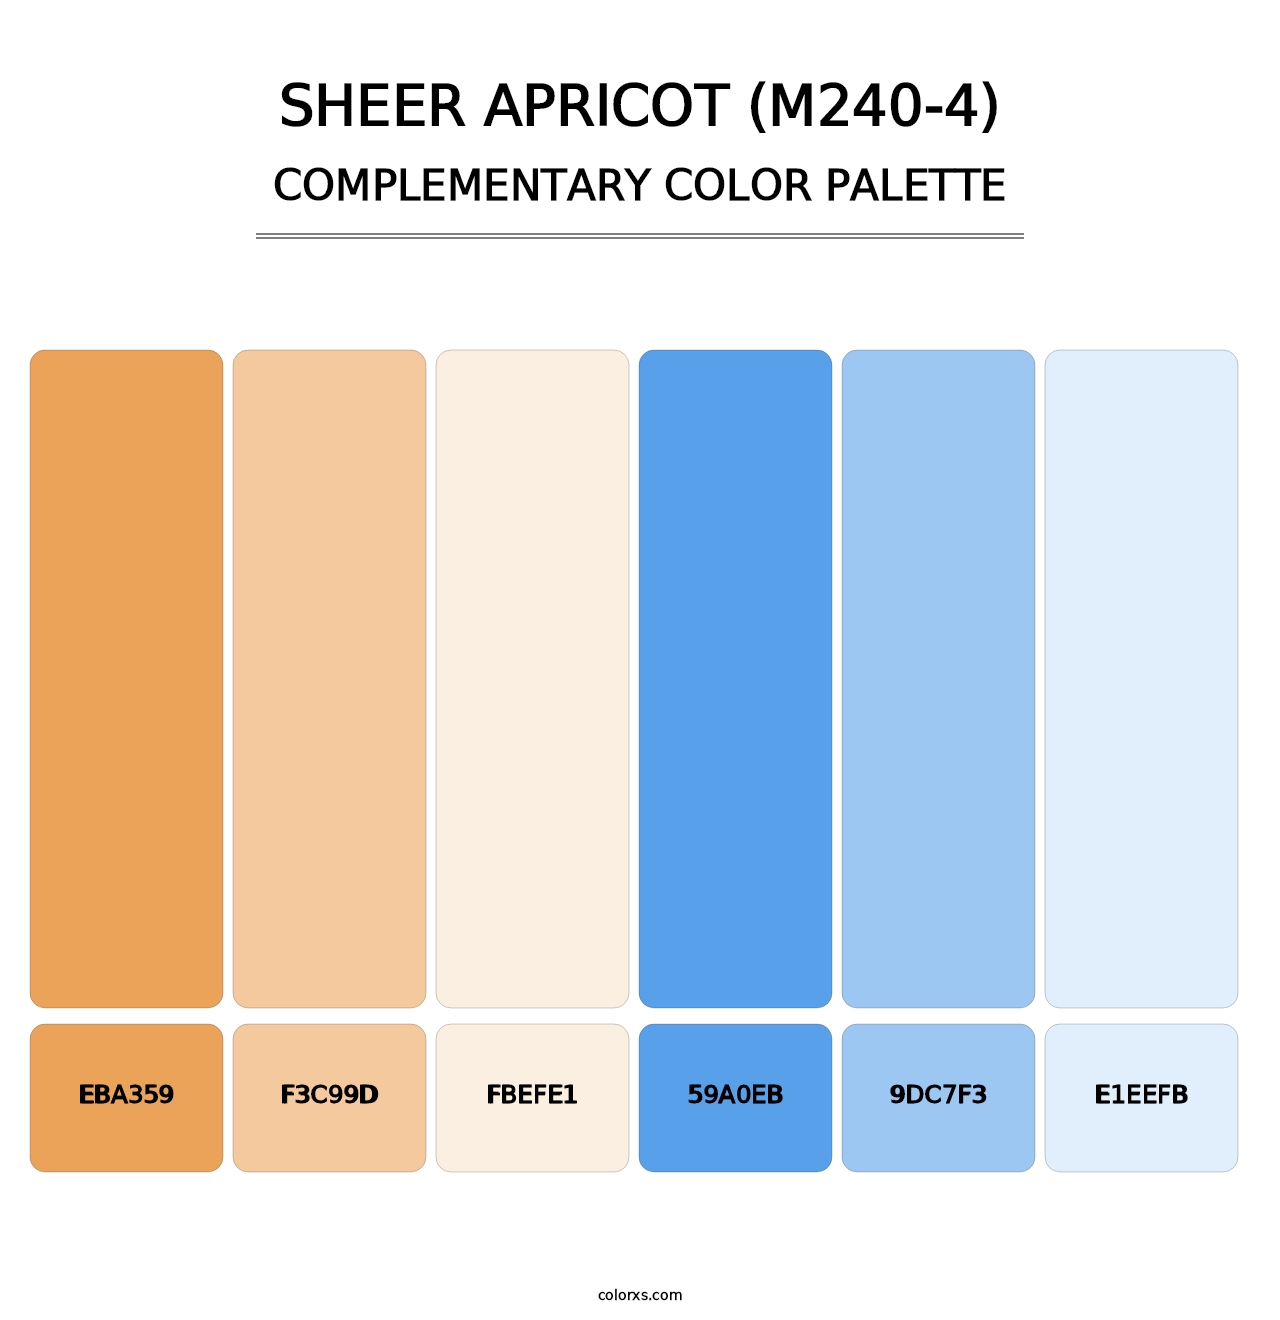 Sheer Apricot (M240-4) - Complementary Color Palette